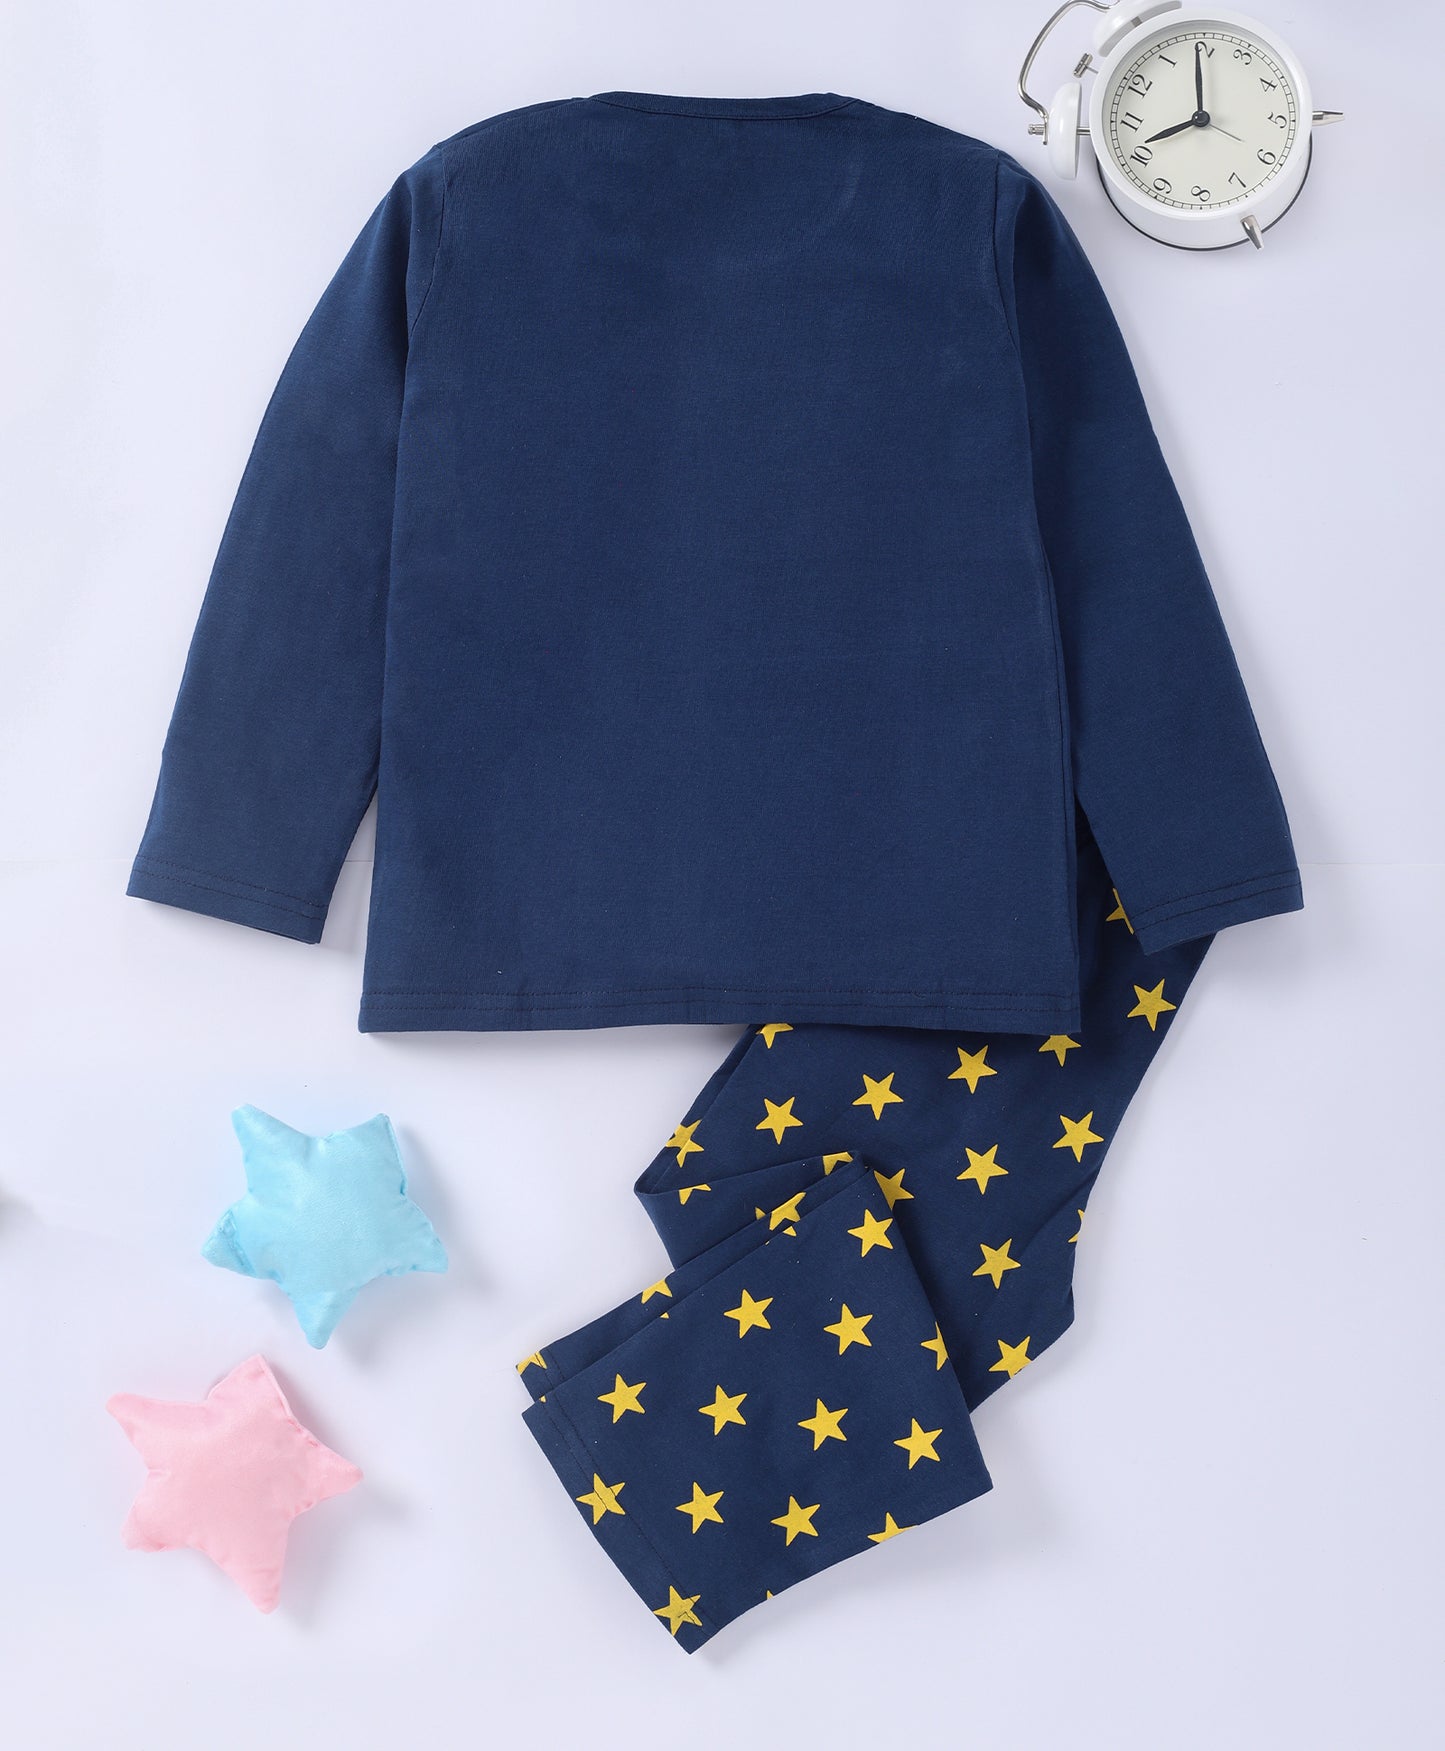 Blue & Pink Pure Cotton Knitted Full Sleeves Star & Butterfly Printed Nightsuit for Girls - Pack of 2